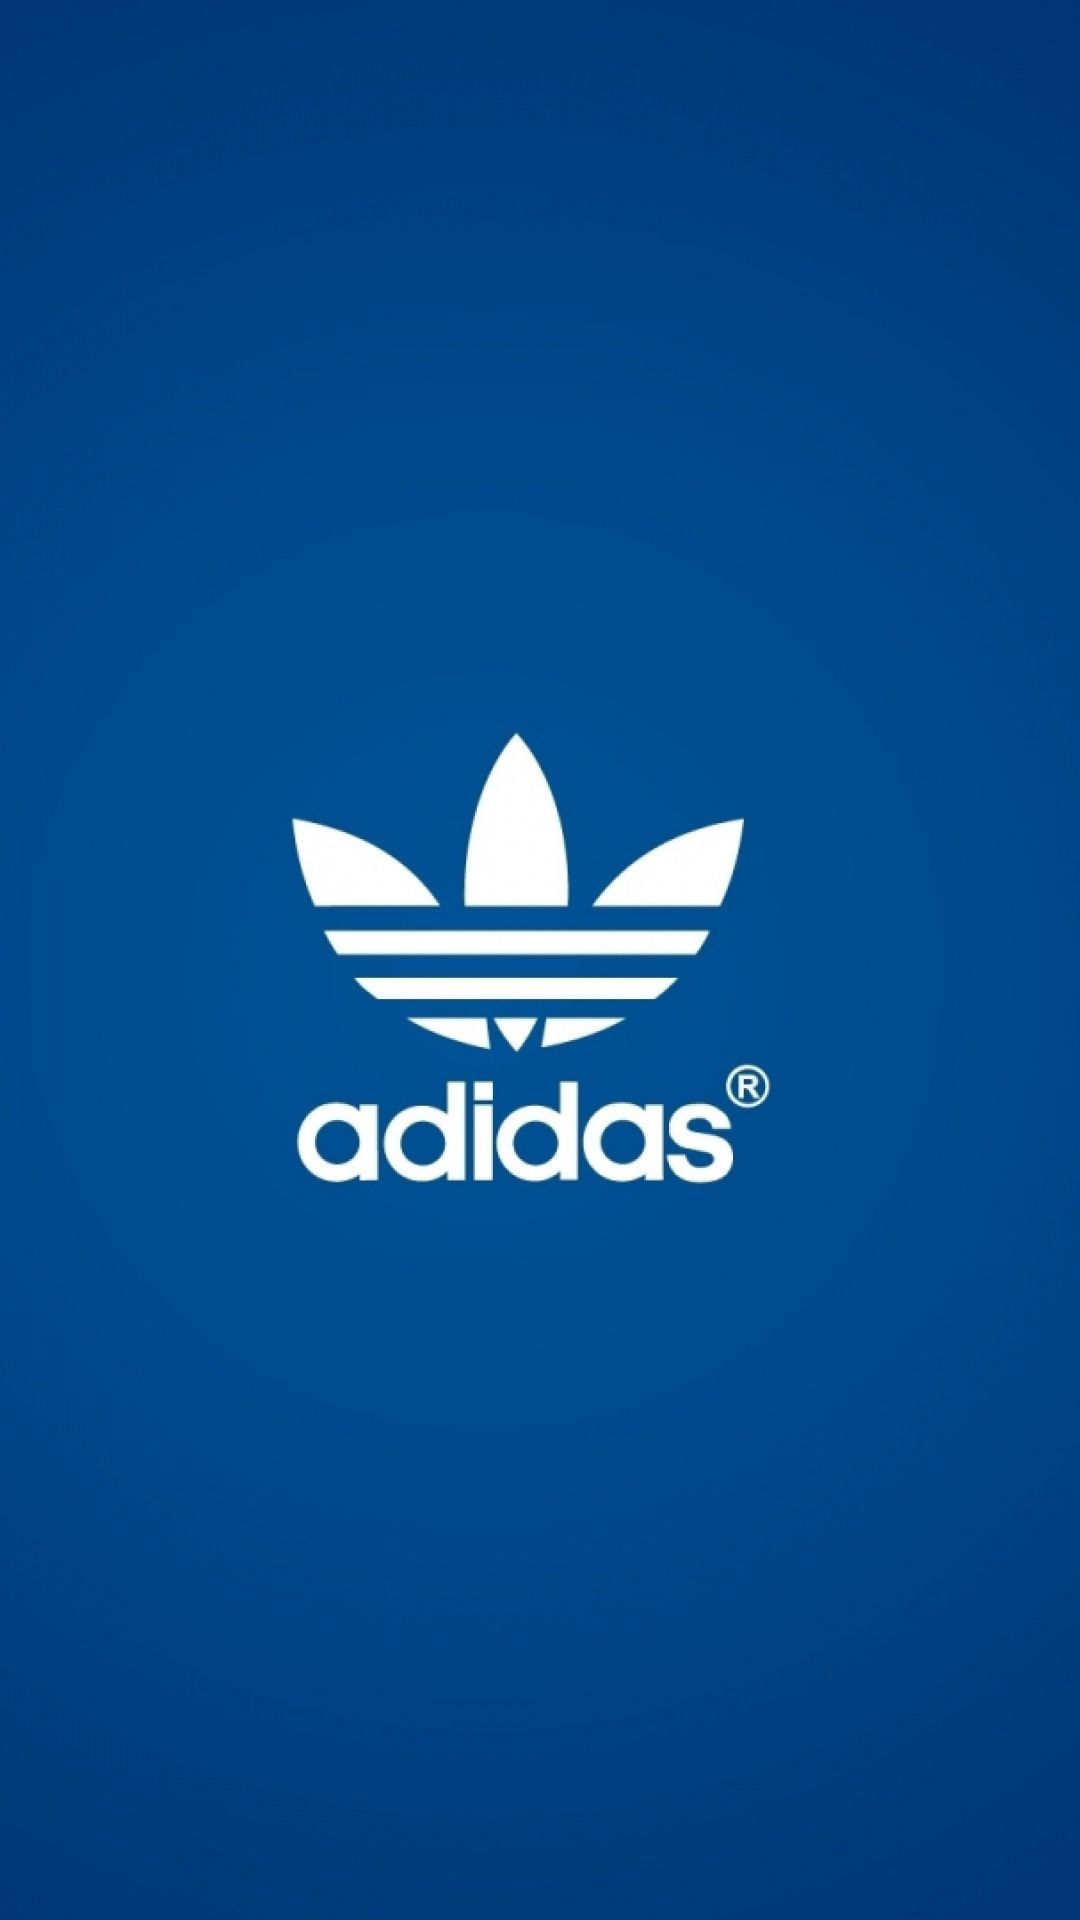 52+] Adidas Wallpapers for iPhone on ...